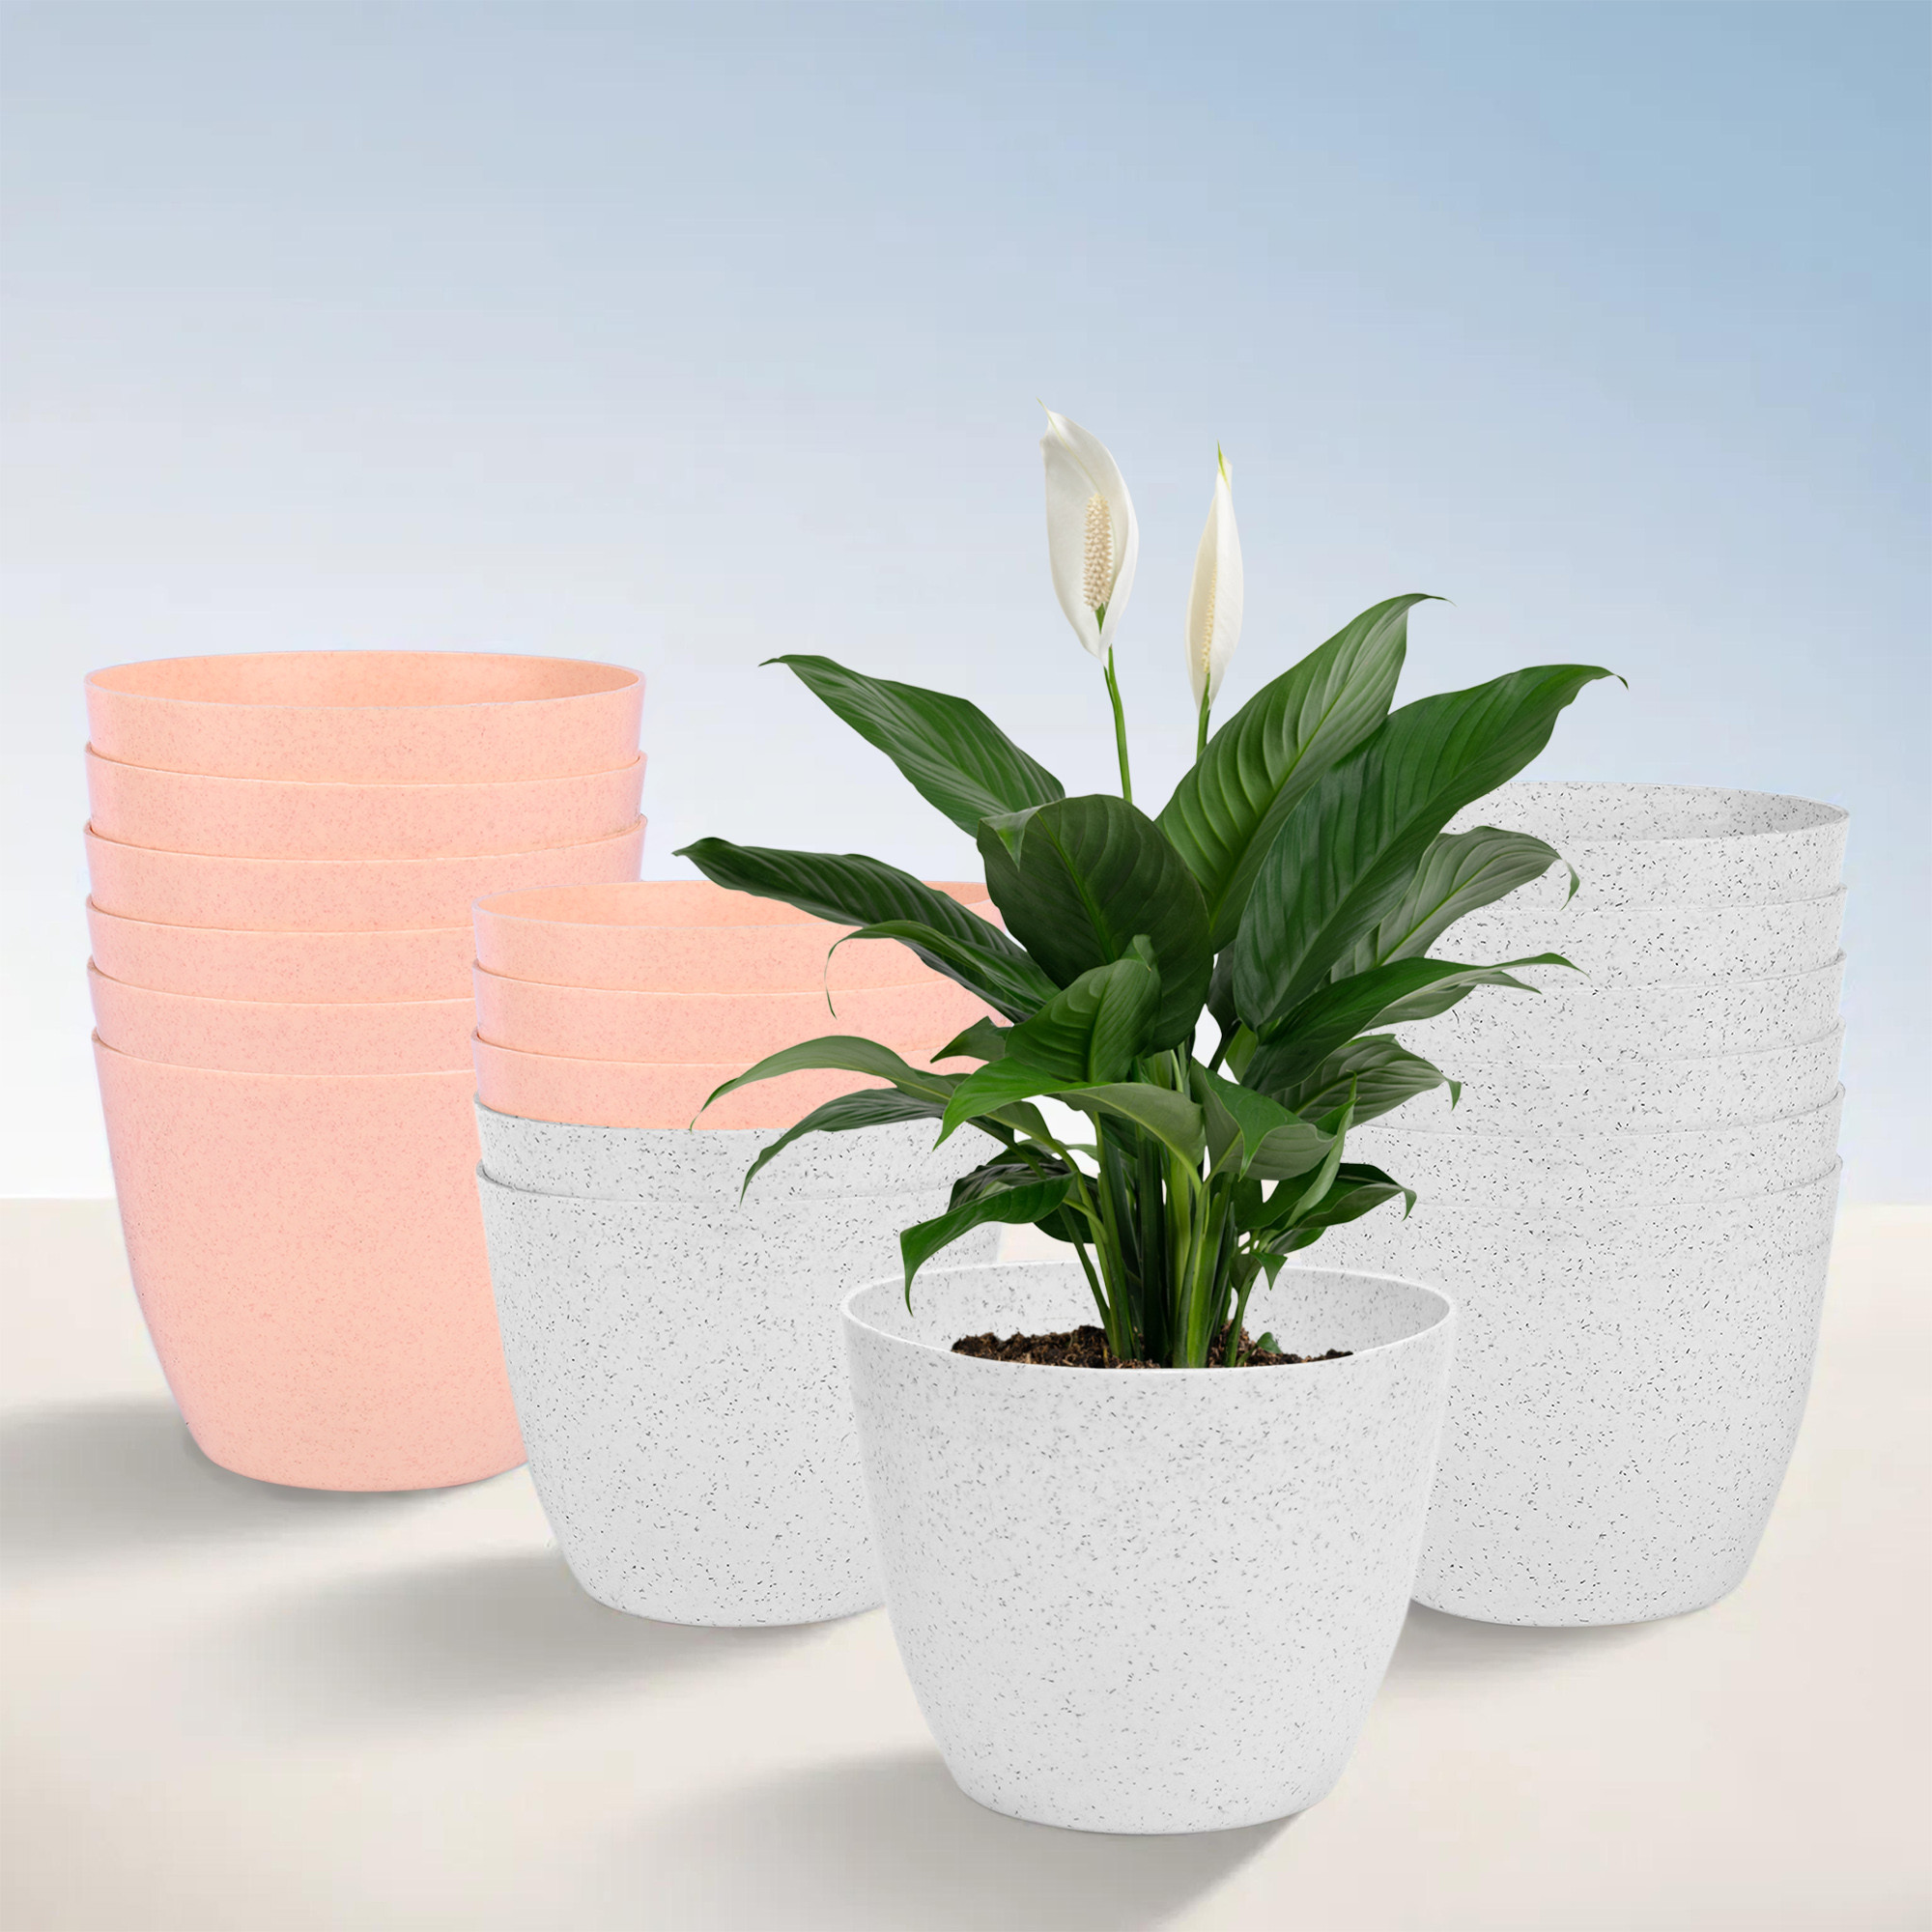 Kuber Industries Flower Pot | Flower Pot for Living Room-Office | Flower Planters for Home-office-Lawns & Garden Décor | Planters Pots for Balcony | Marble Cool | 5 Inch | White & Peach